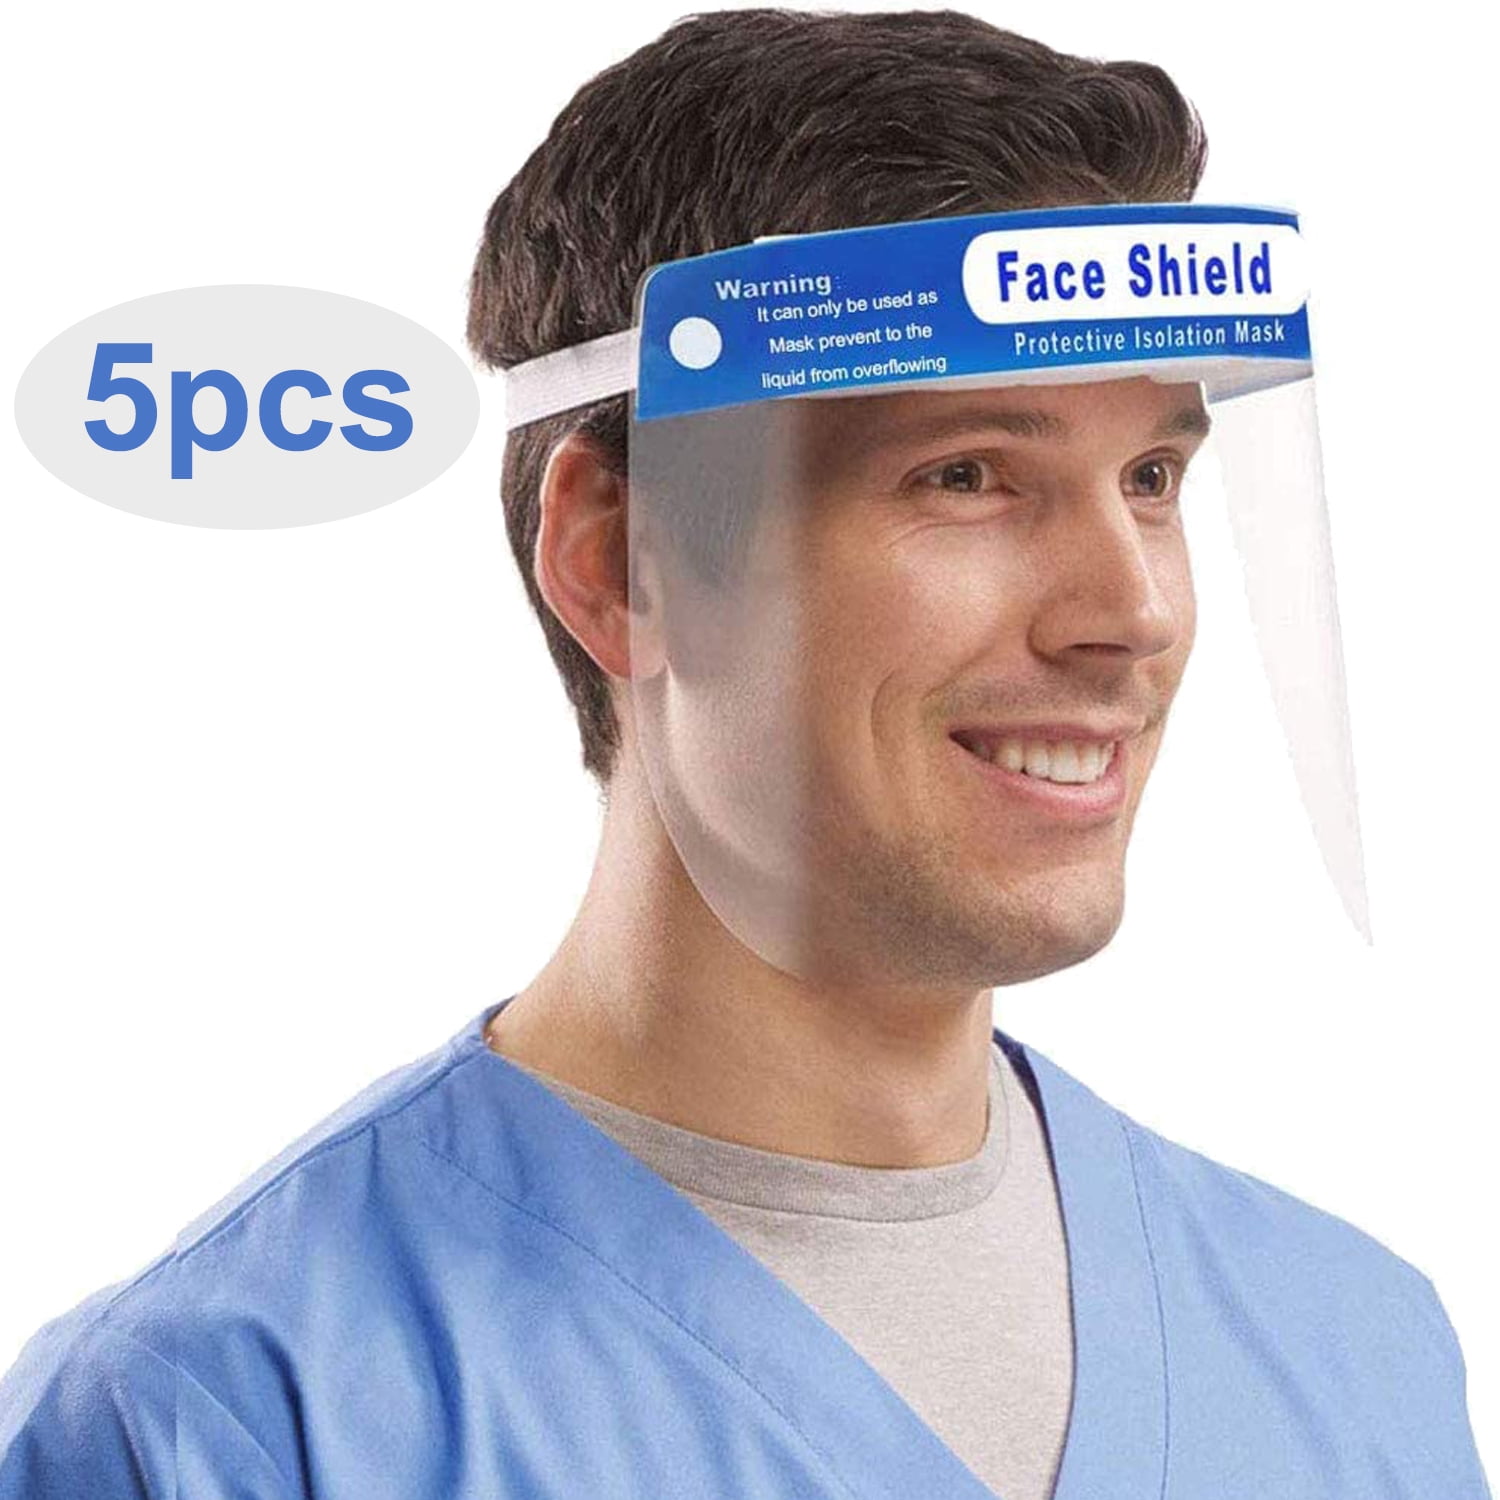 set of 12 【Enhanced version】Face Guard Protective Shield Transparent Surface Cover Made of PET Prevents splashing Dust-proof lightweight Breathable Safety Easy installation shield Adjustable 